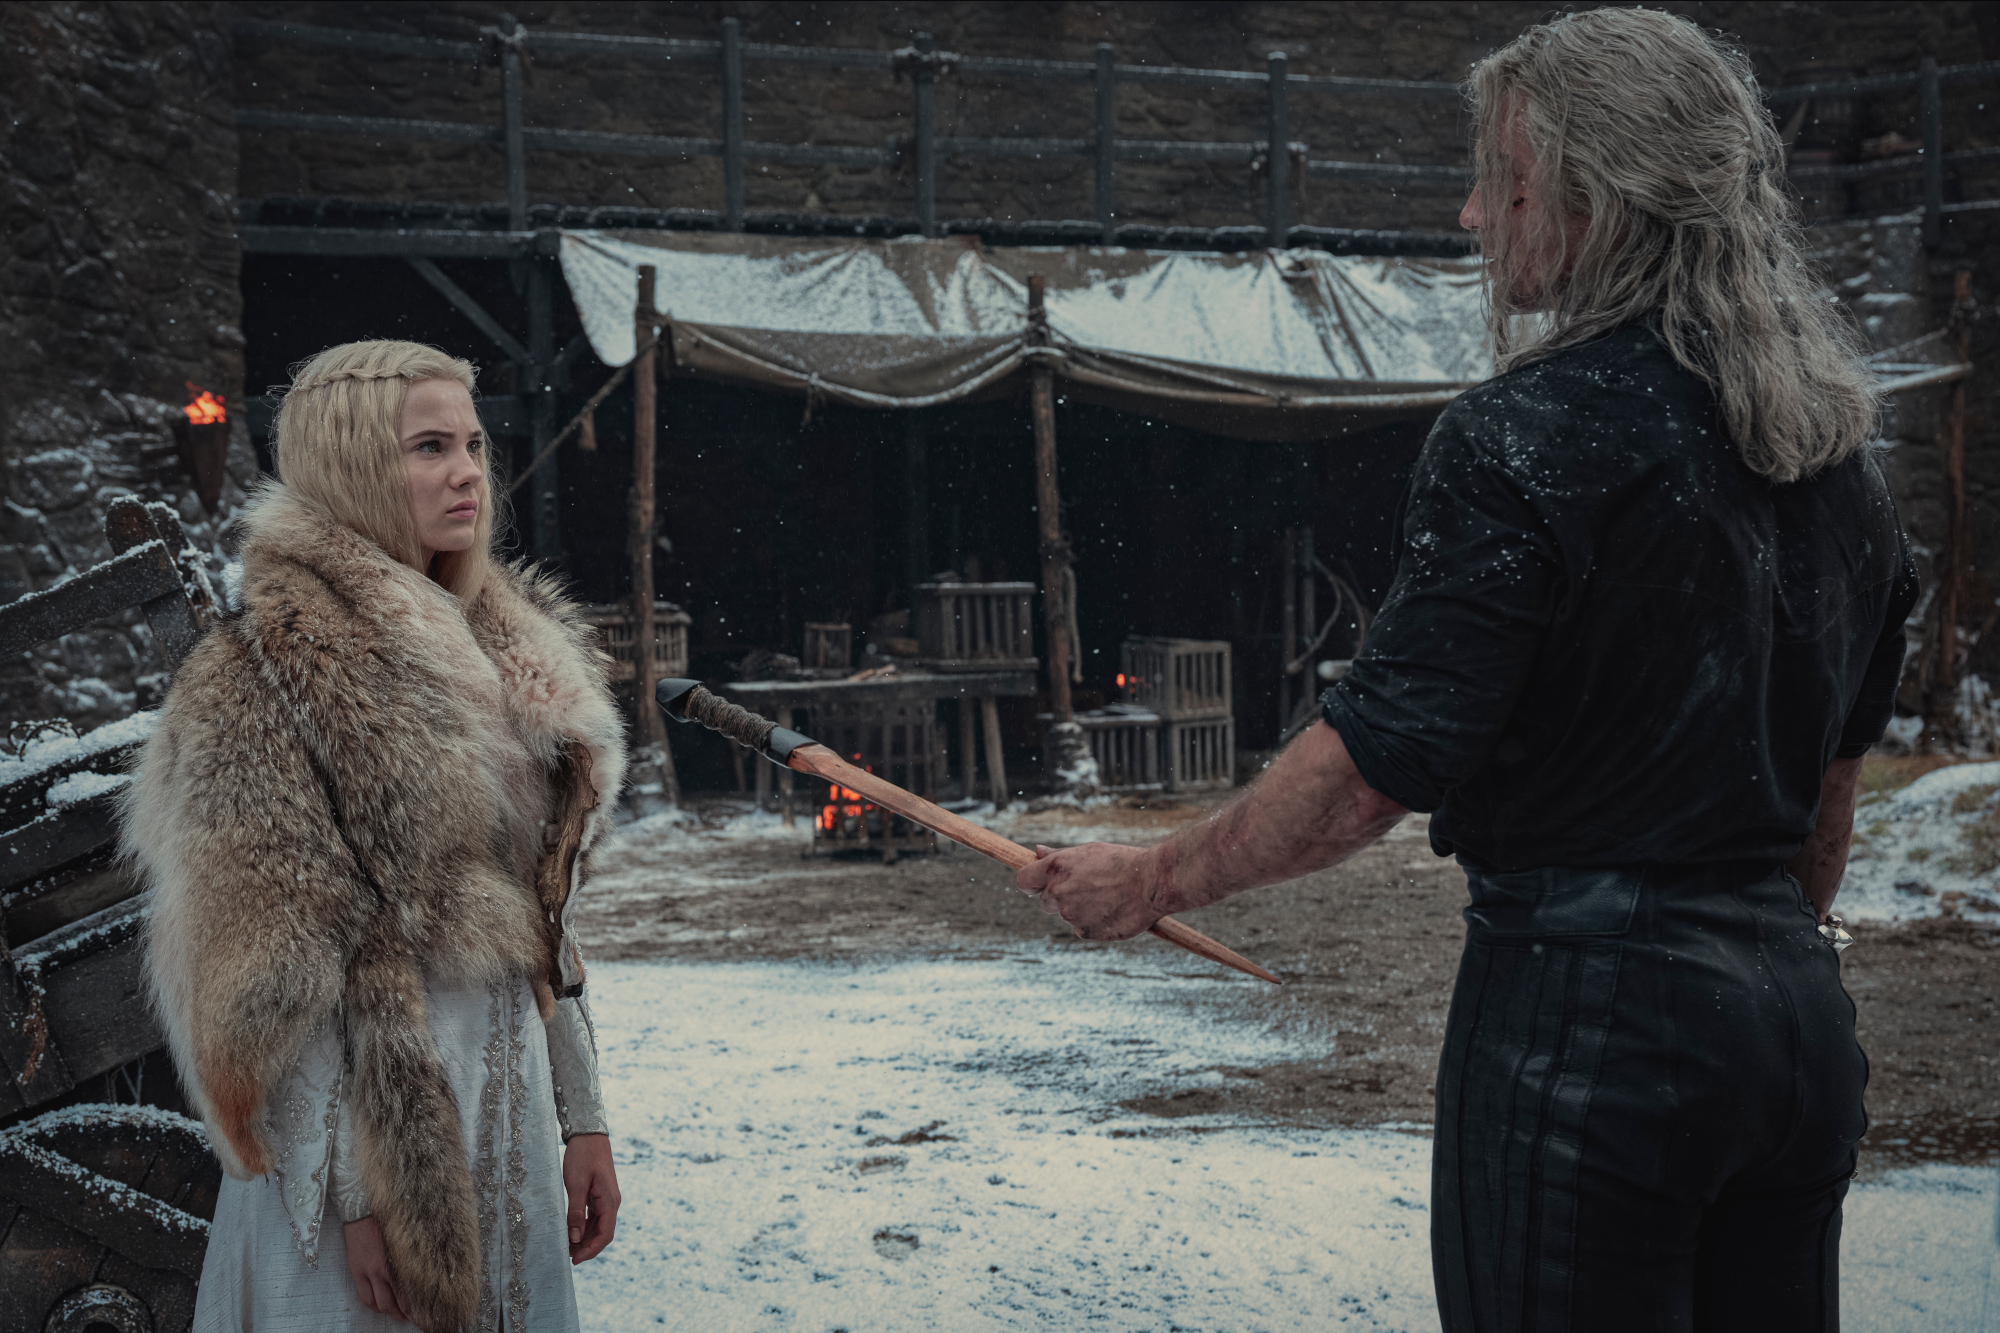 Freya Allen and Henry Cavill as Ciri and Geralt in 'The Witcher' Season 2. They're standing in the snow, and he's handing her a sword.